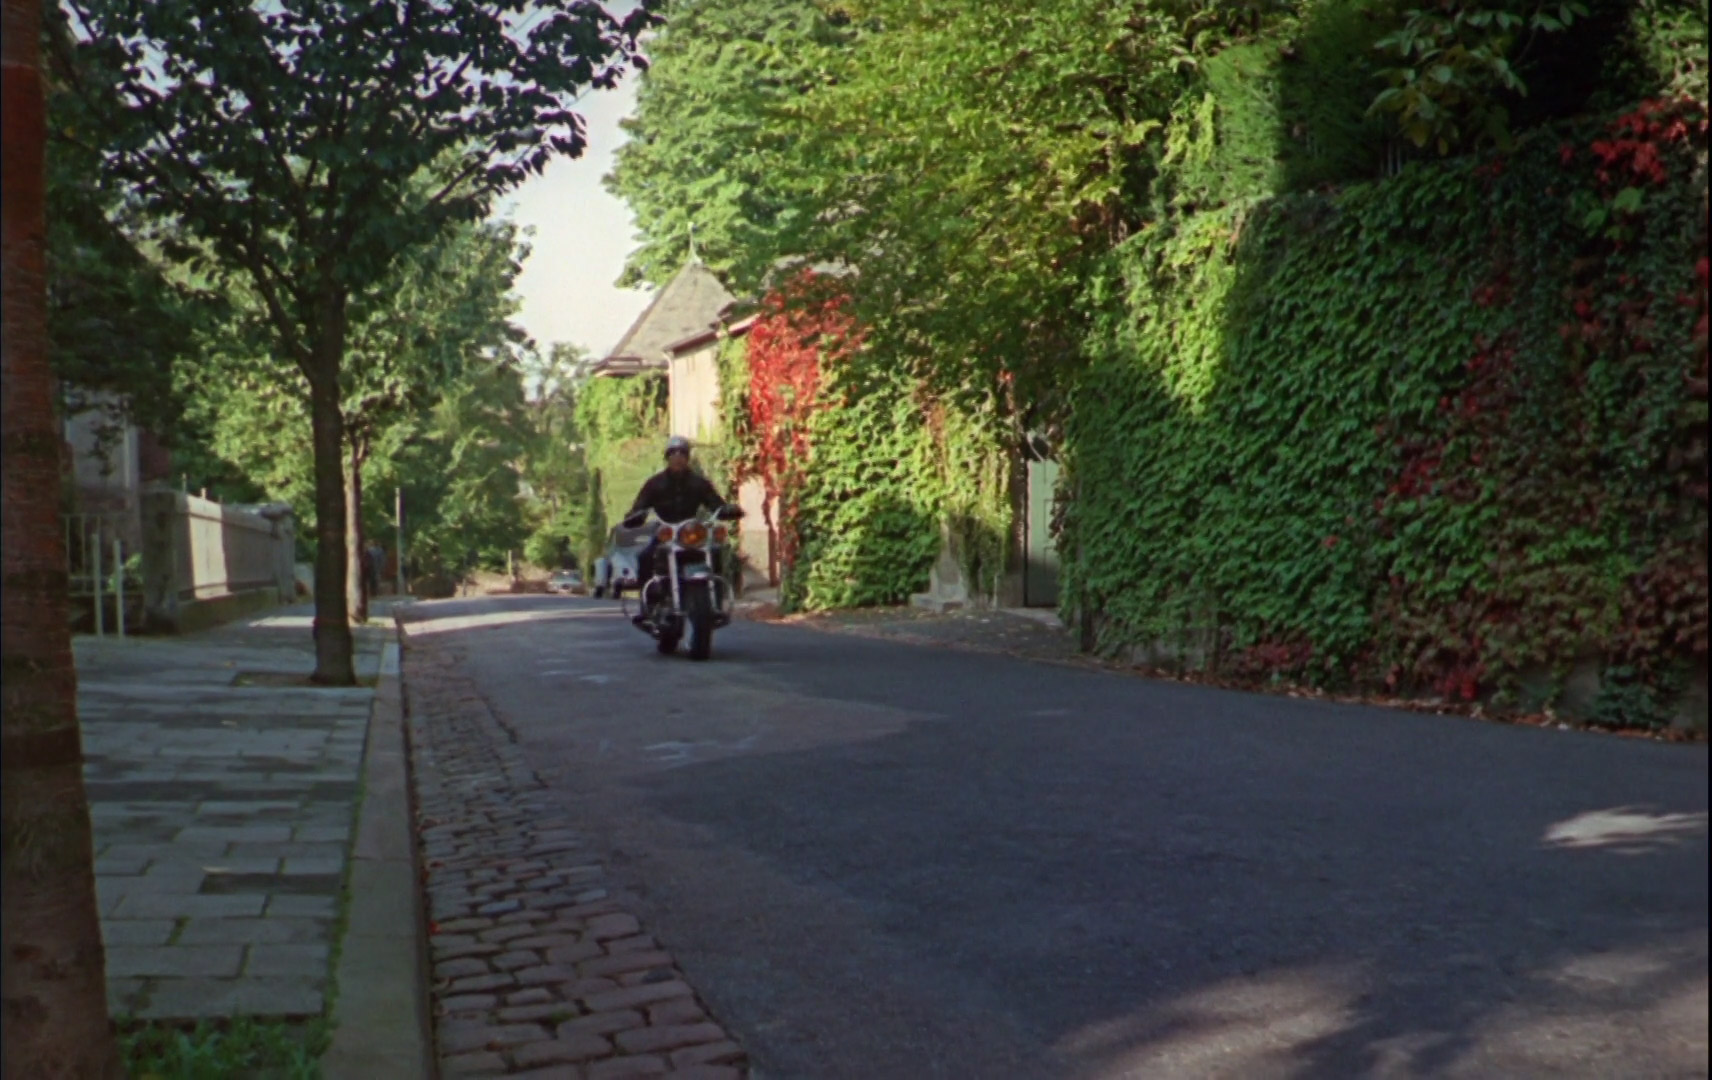 Marianne Faithfull in The Girl on a Motorcycle